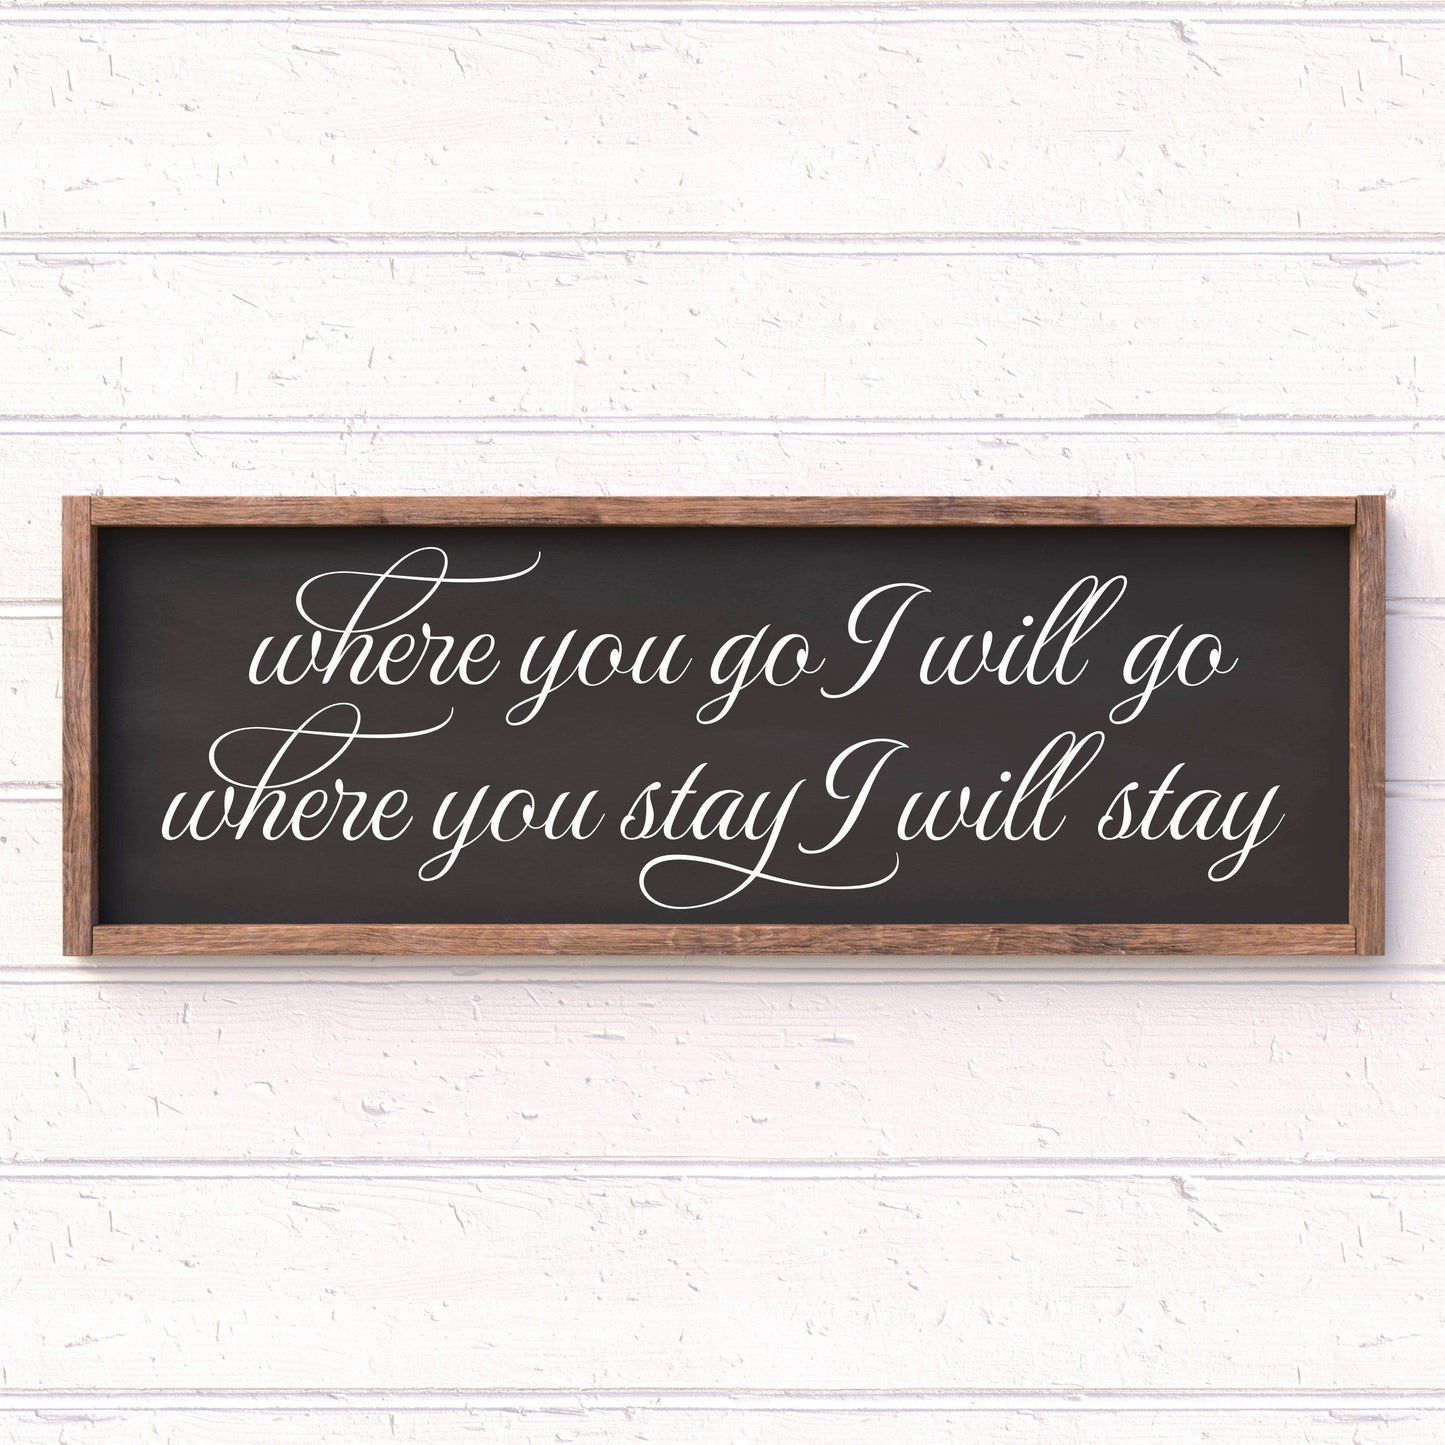 Where you go, I go framed wood sign, love sign, couples gift sign, quote sign, home decor